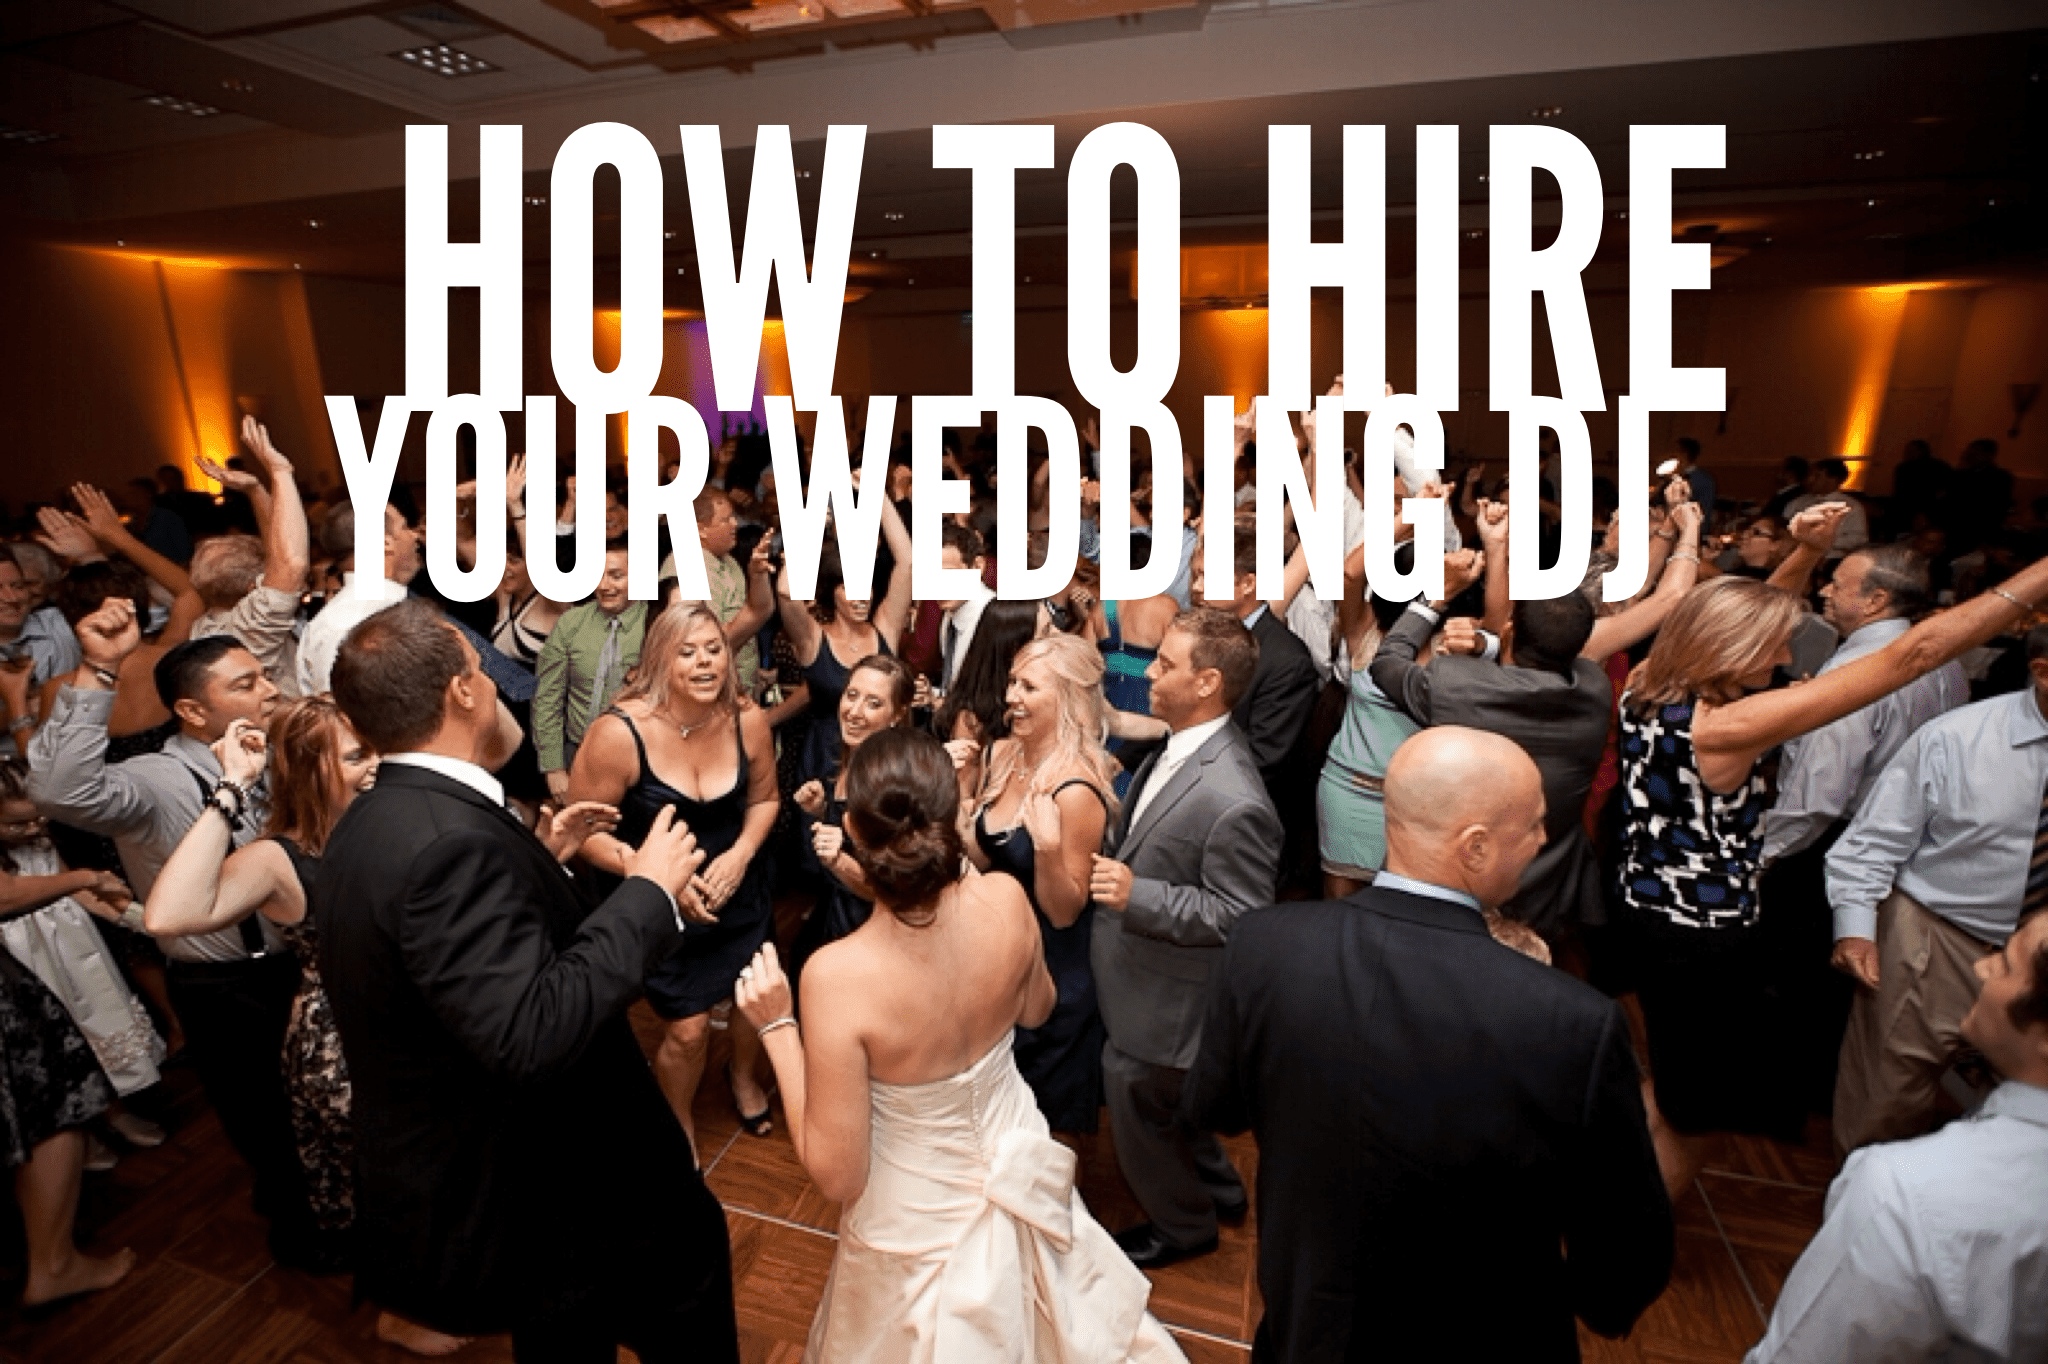 Listen to a podcast for expert advice on hiring your wedding DJ.